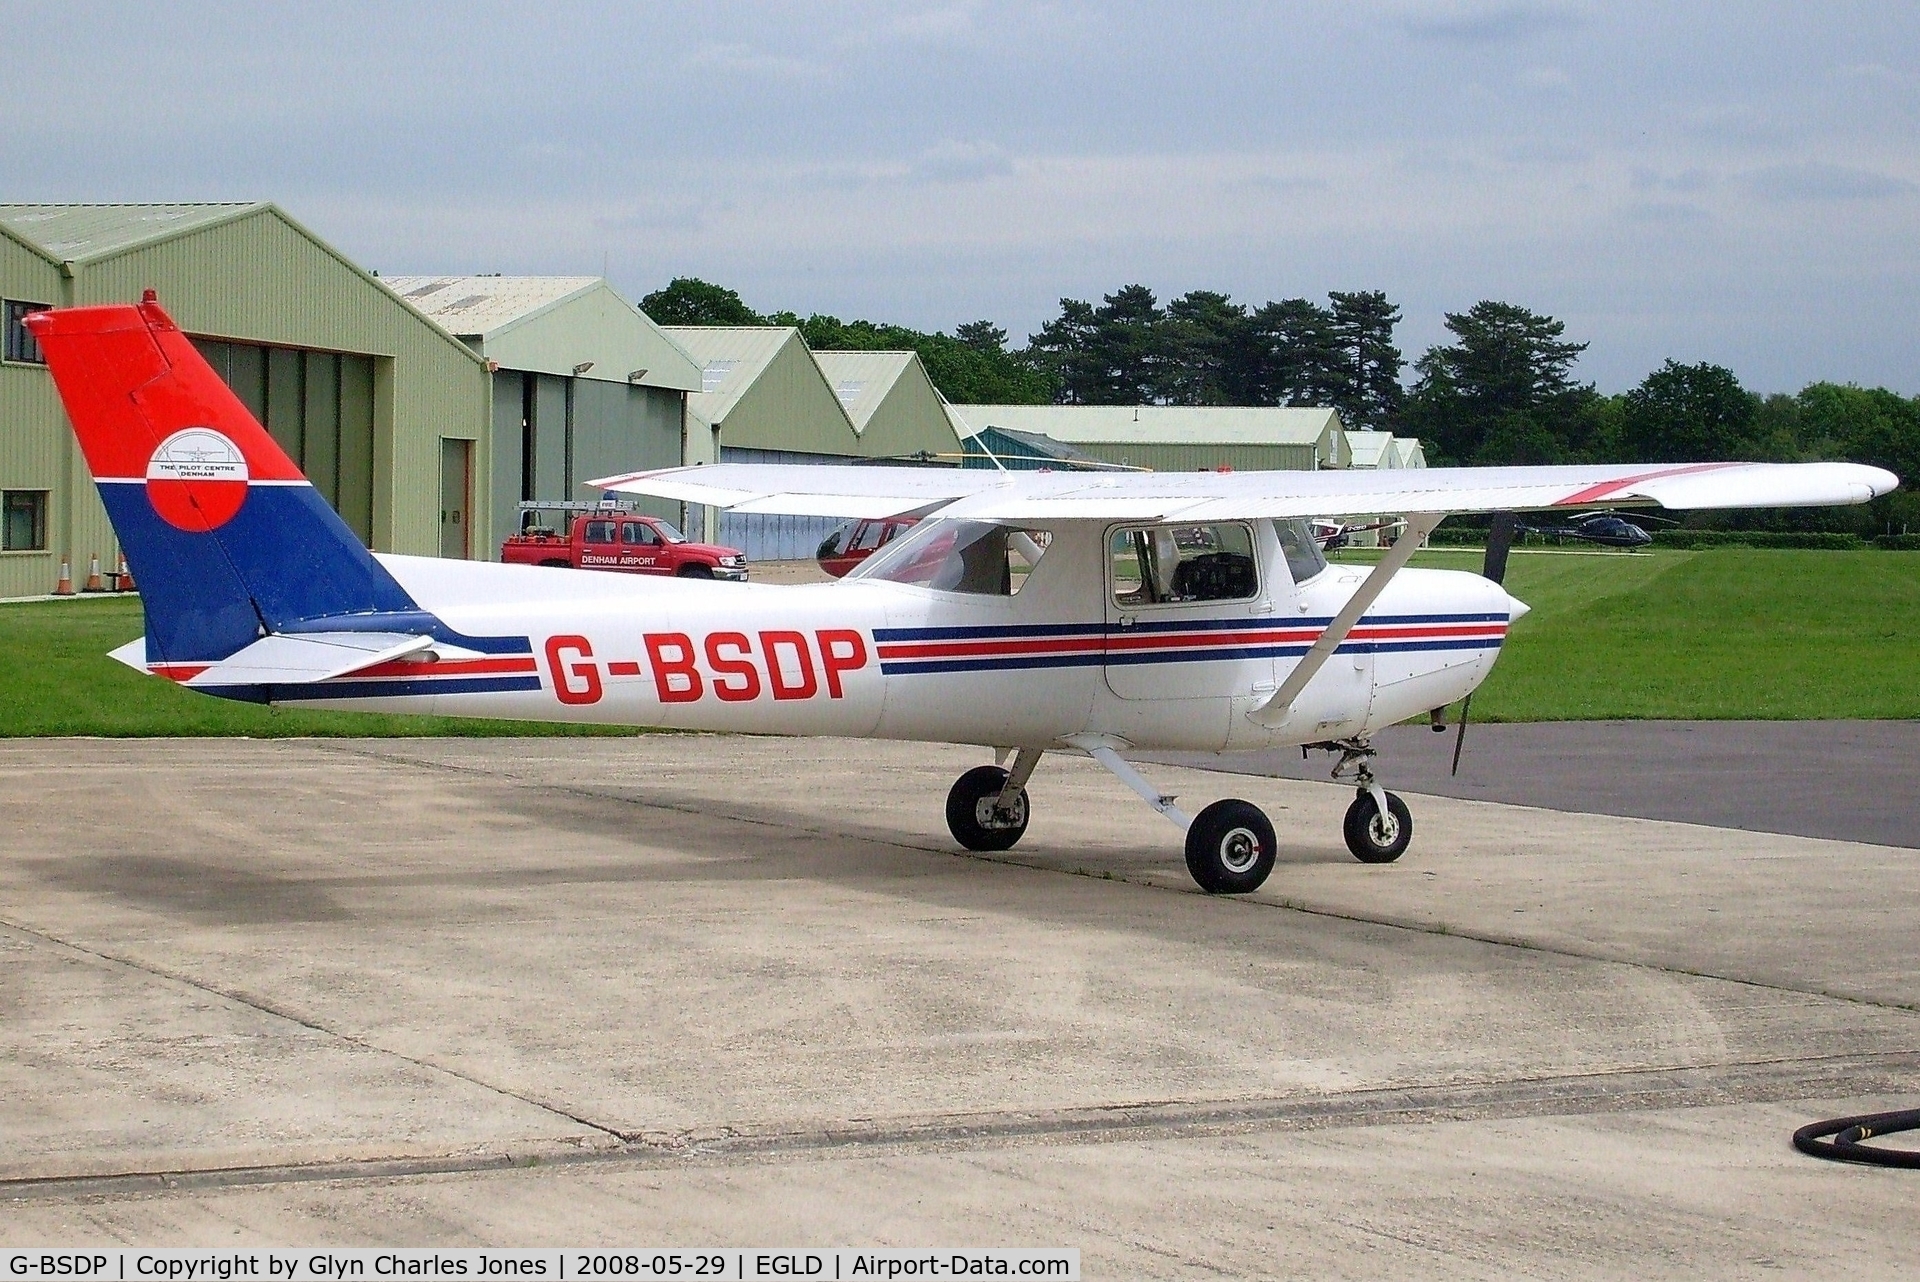 G-BSDP, 1977 Cessna 152 C/N 152-80268, Previously N24468. Operated by The Pilot Centre Denham. It had just been refuelled ready for its next flight.